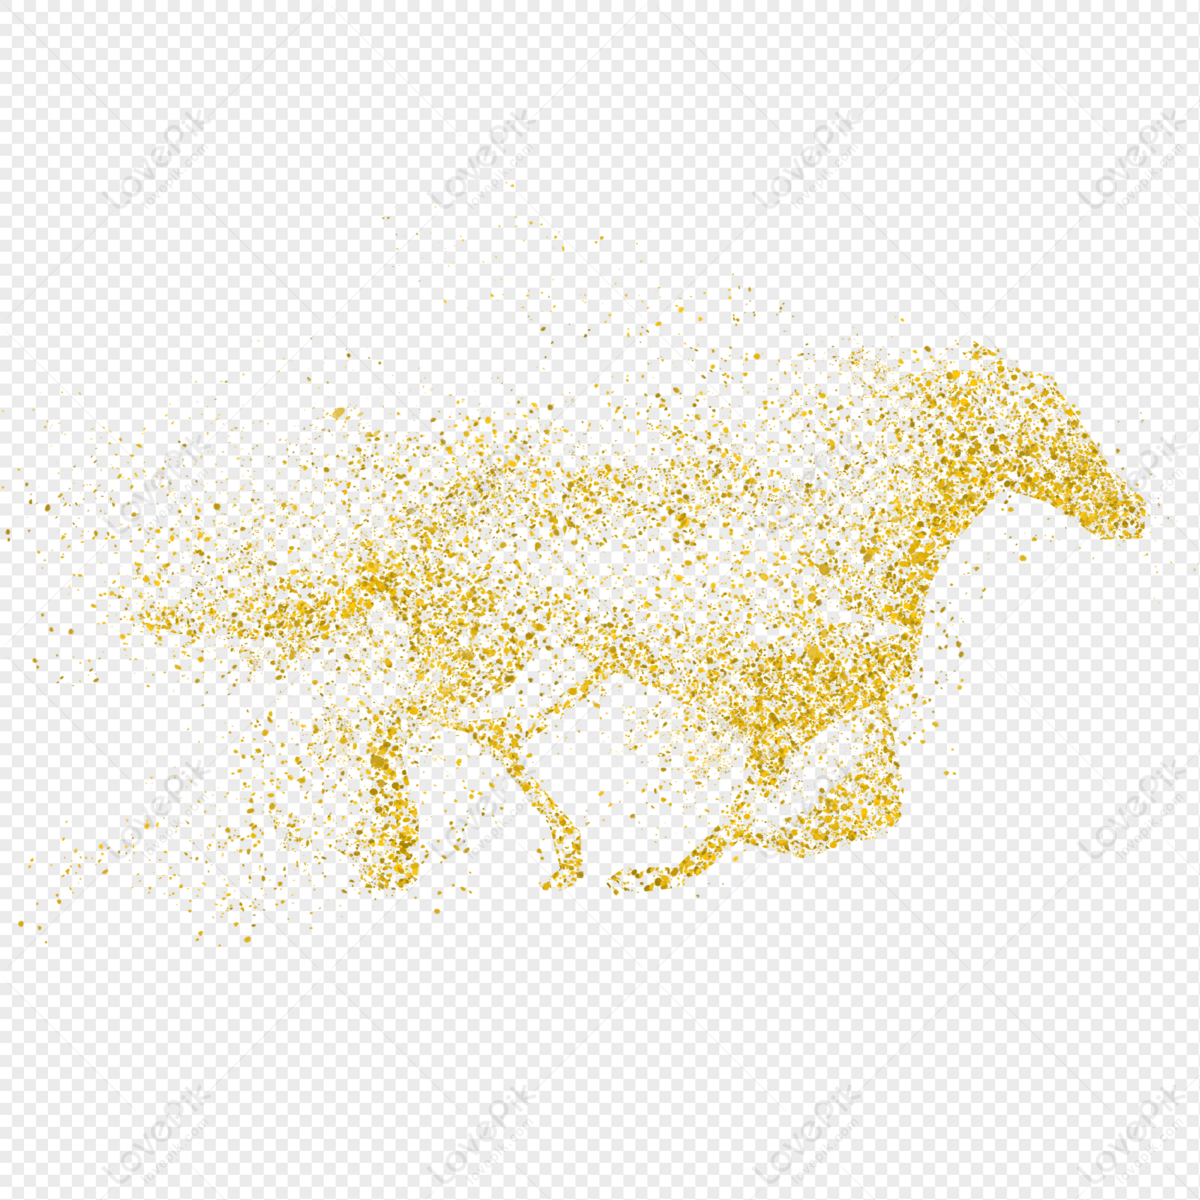 lovepik a running horse png image 401013835 wh1200